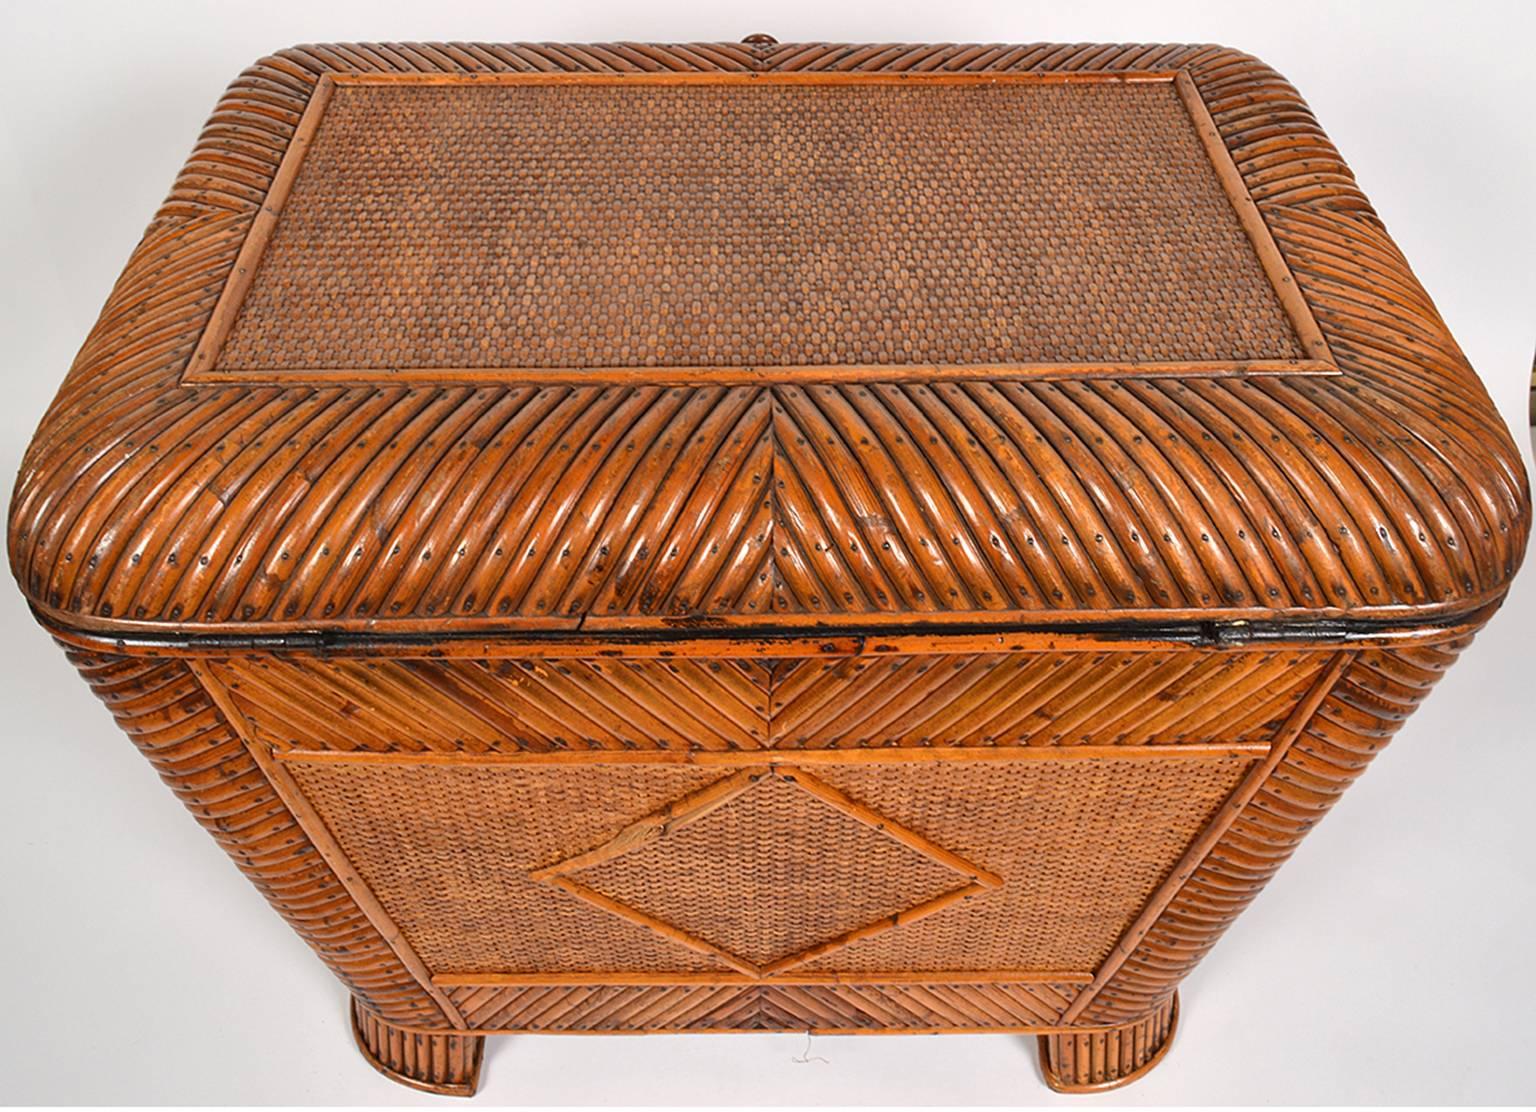 19th Century English Patterned Bamboo and Raffia Weave Covered Storage Box 6